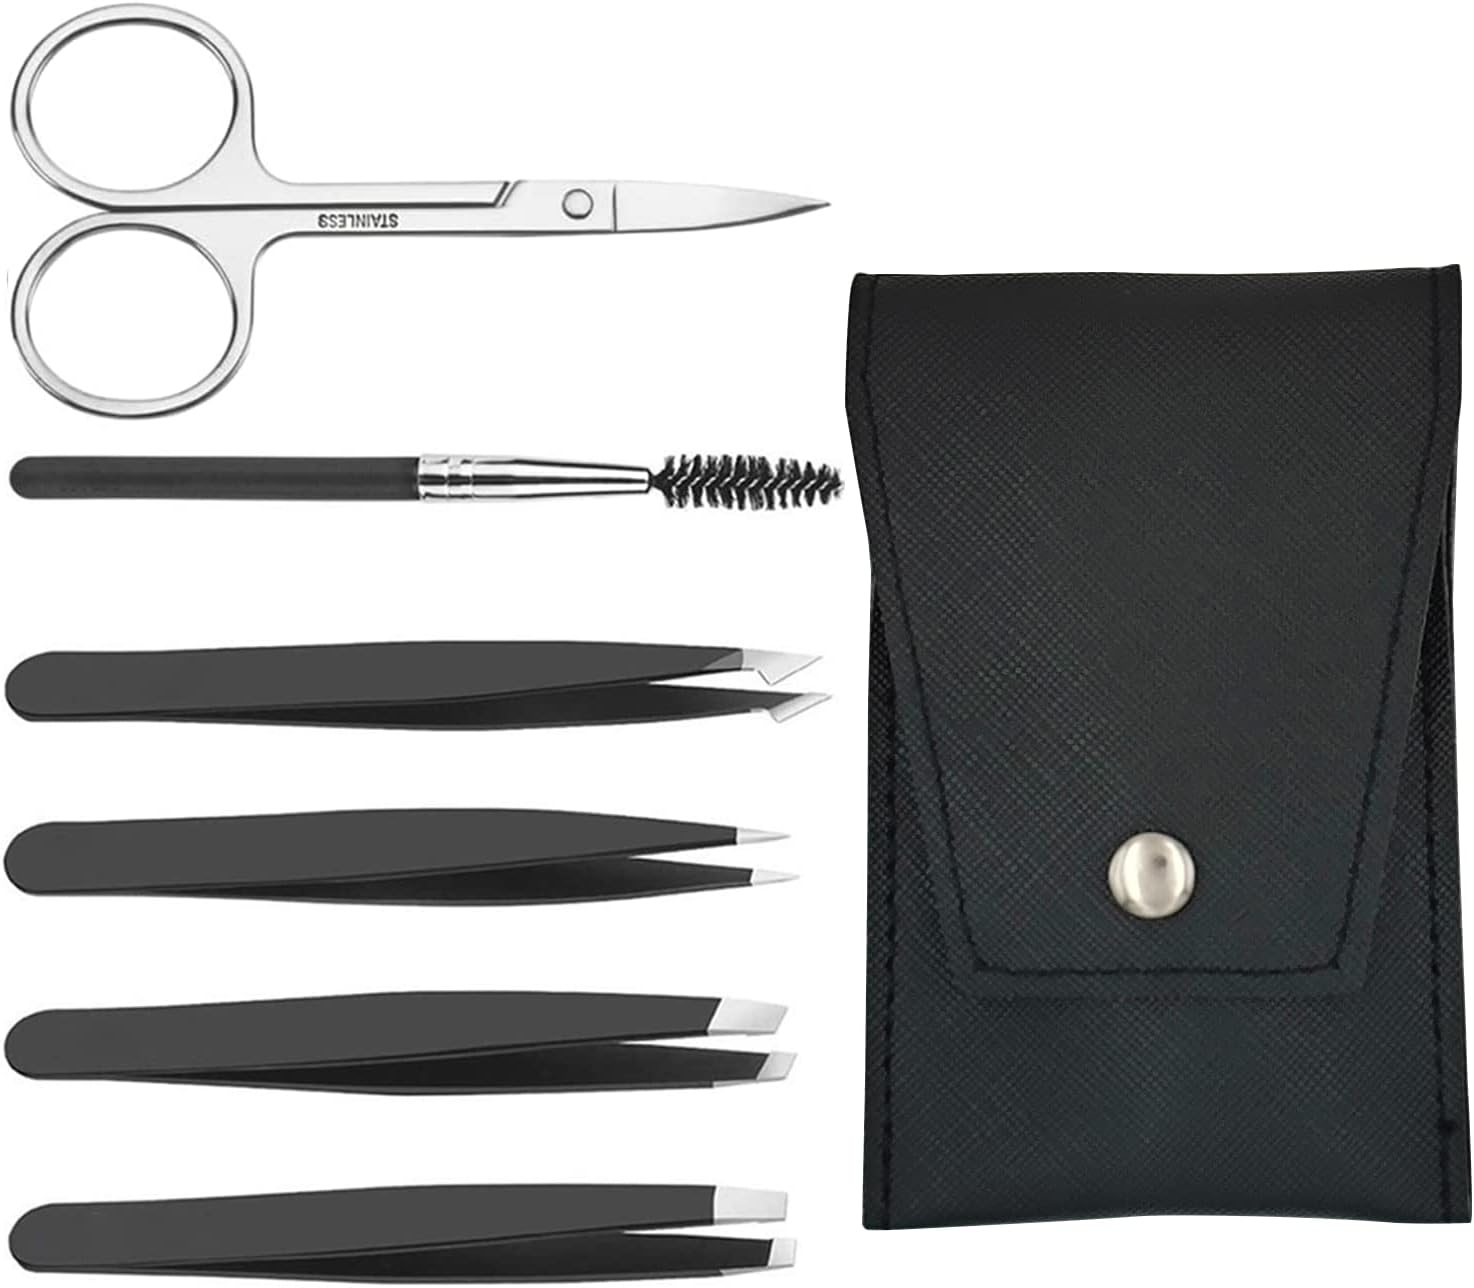 Wholesale prices with free shipping all over United States 6 PCS Eyebrow Tweezers Professional Set, Stainless Steel Eyebrow Trimming Kit for Women/Men, with Curved Scissors, Hair Plucking Daily Beauty Tools with Leather Travel Case - Steven Deals